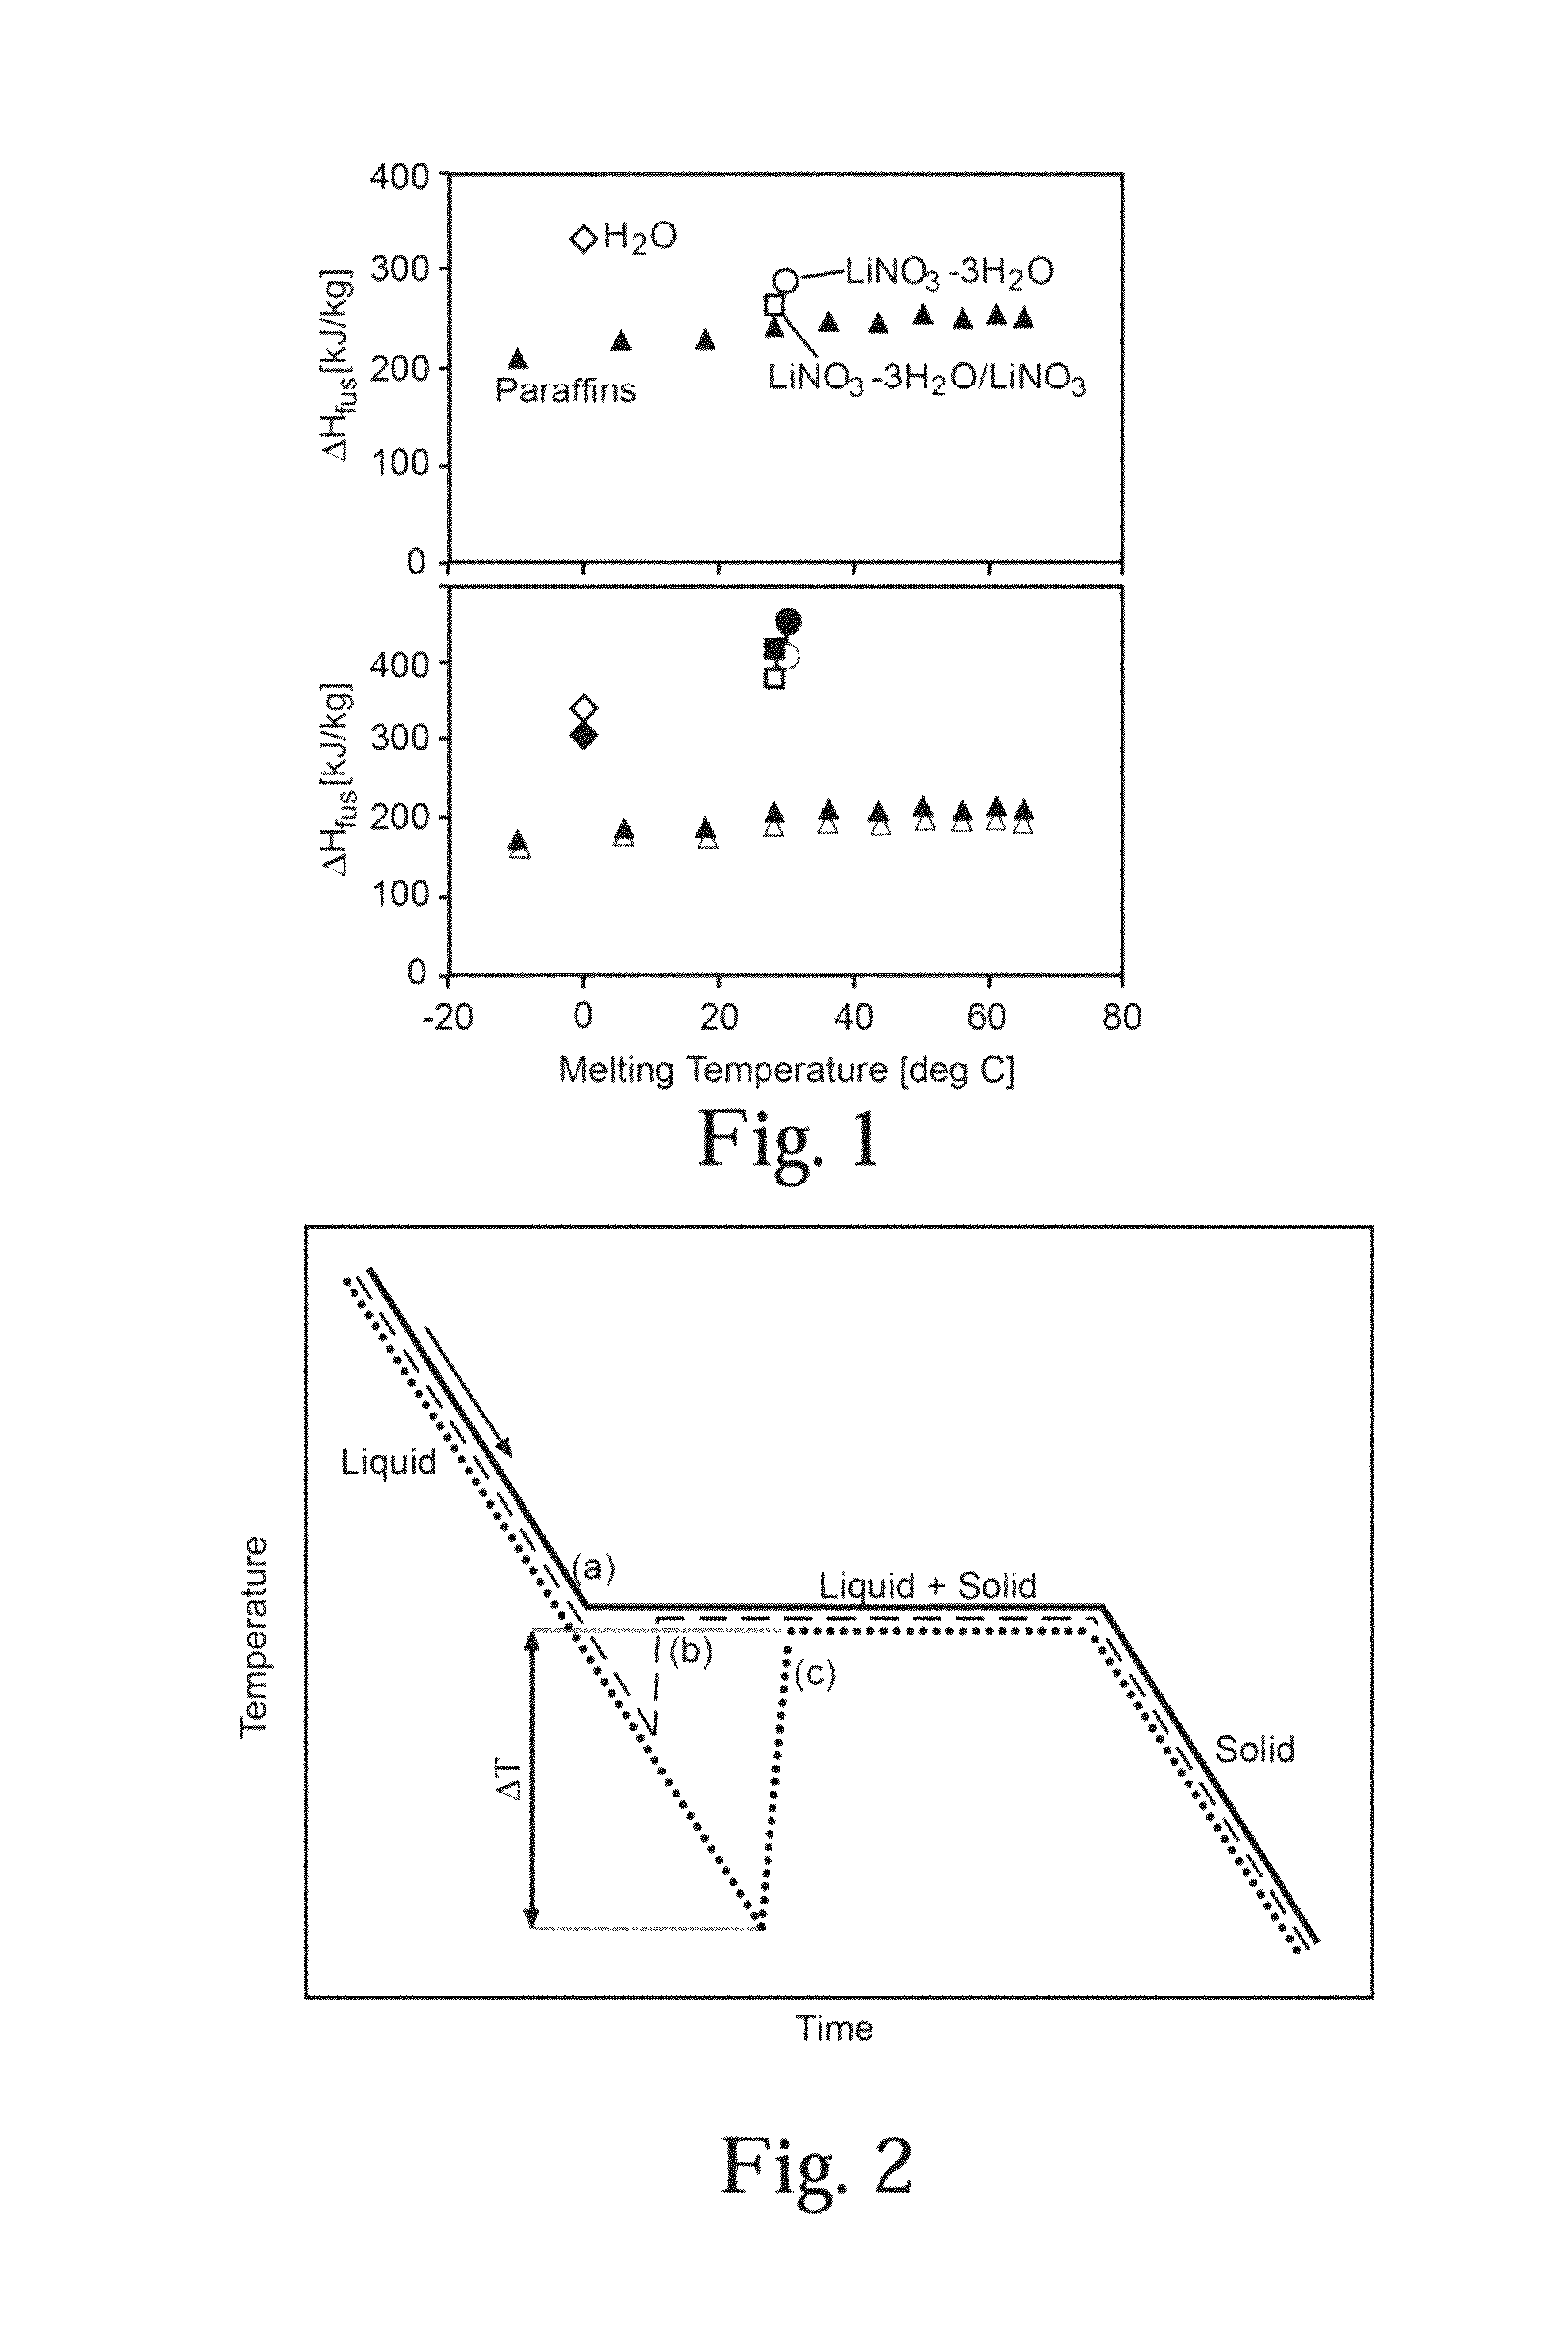 Nucleating agent for lithium nitrate trihydrate thermal energy storage medium